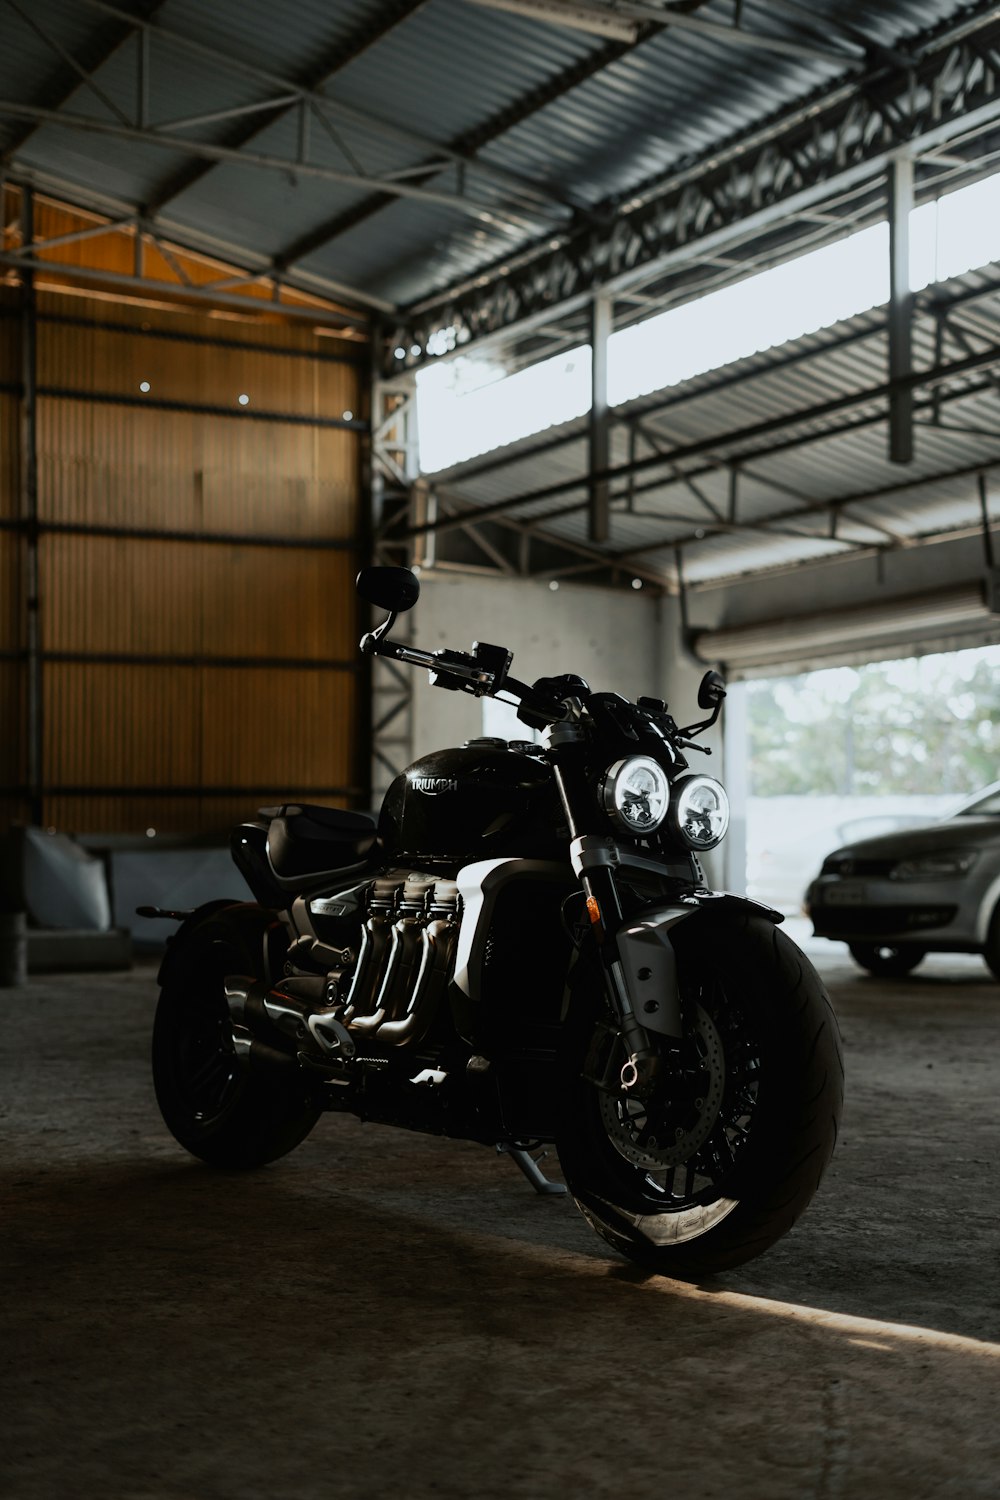 black and gray motorcycle parked in garage